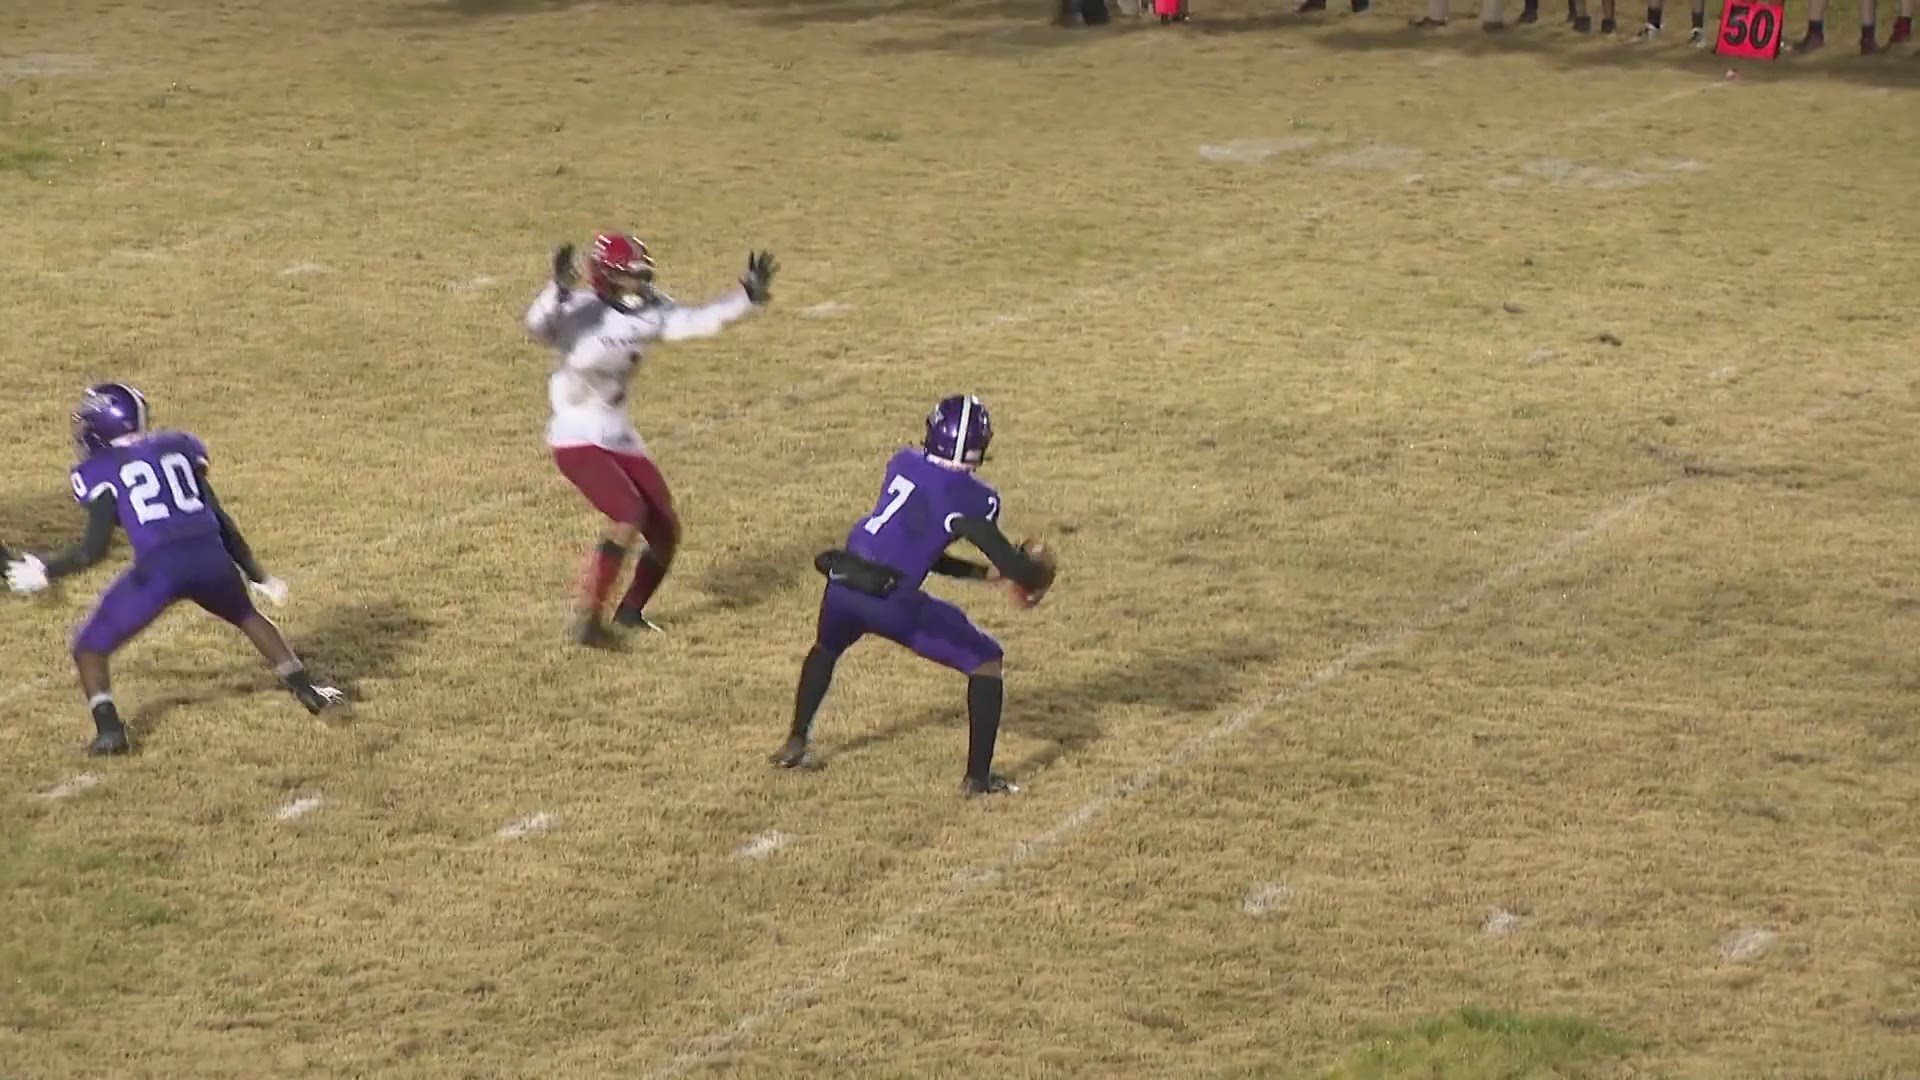 Anthony Barnes threw the first touchdown pass of the high school football season for Deep Creek.